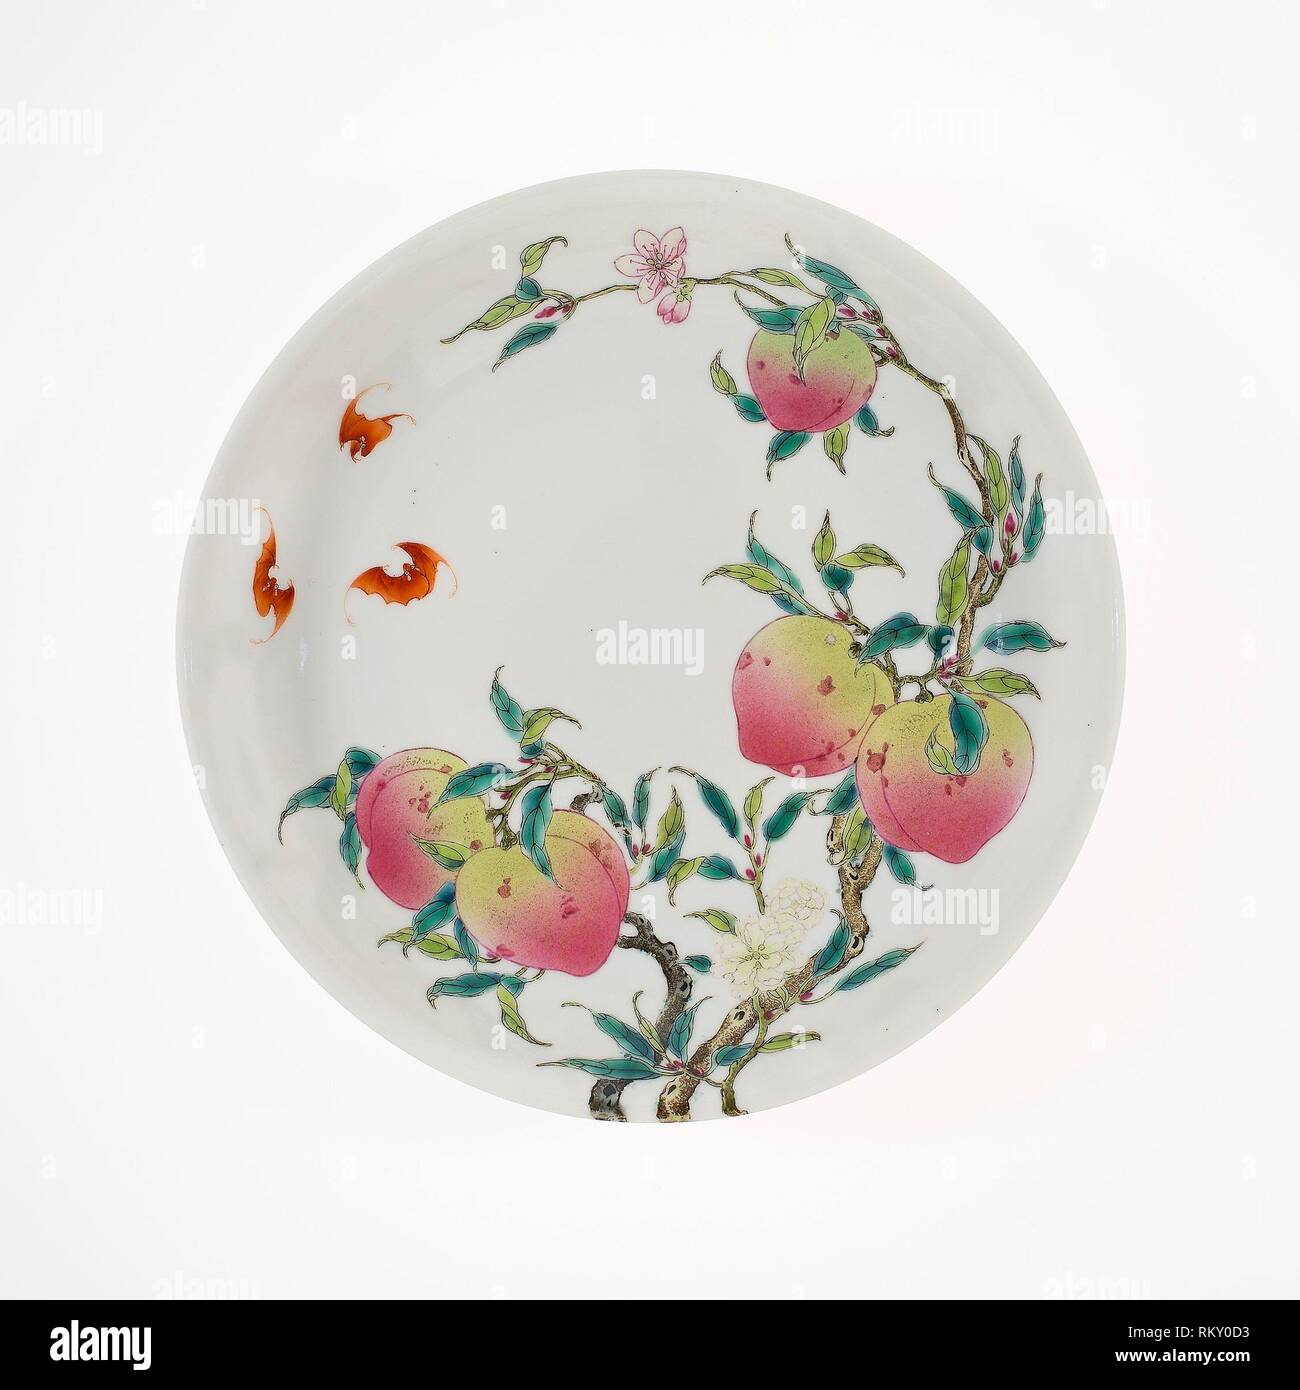 dish-with-fruiting-peaches-tree-peony-flowering-plum-and-bats-qing-dynasty-16441911-apocryphal-yongzheng-mark-17231735-probably-19th-RKY0D3.jpg